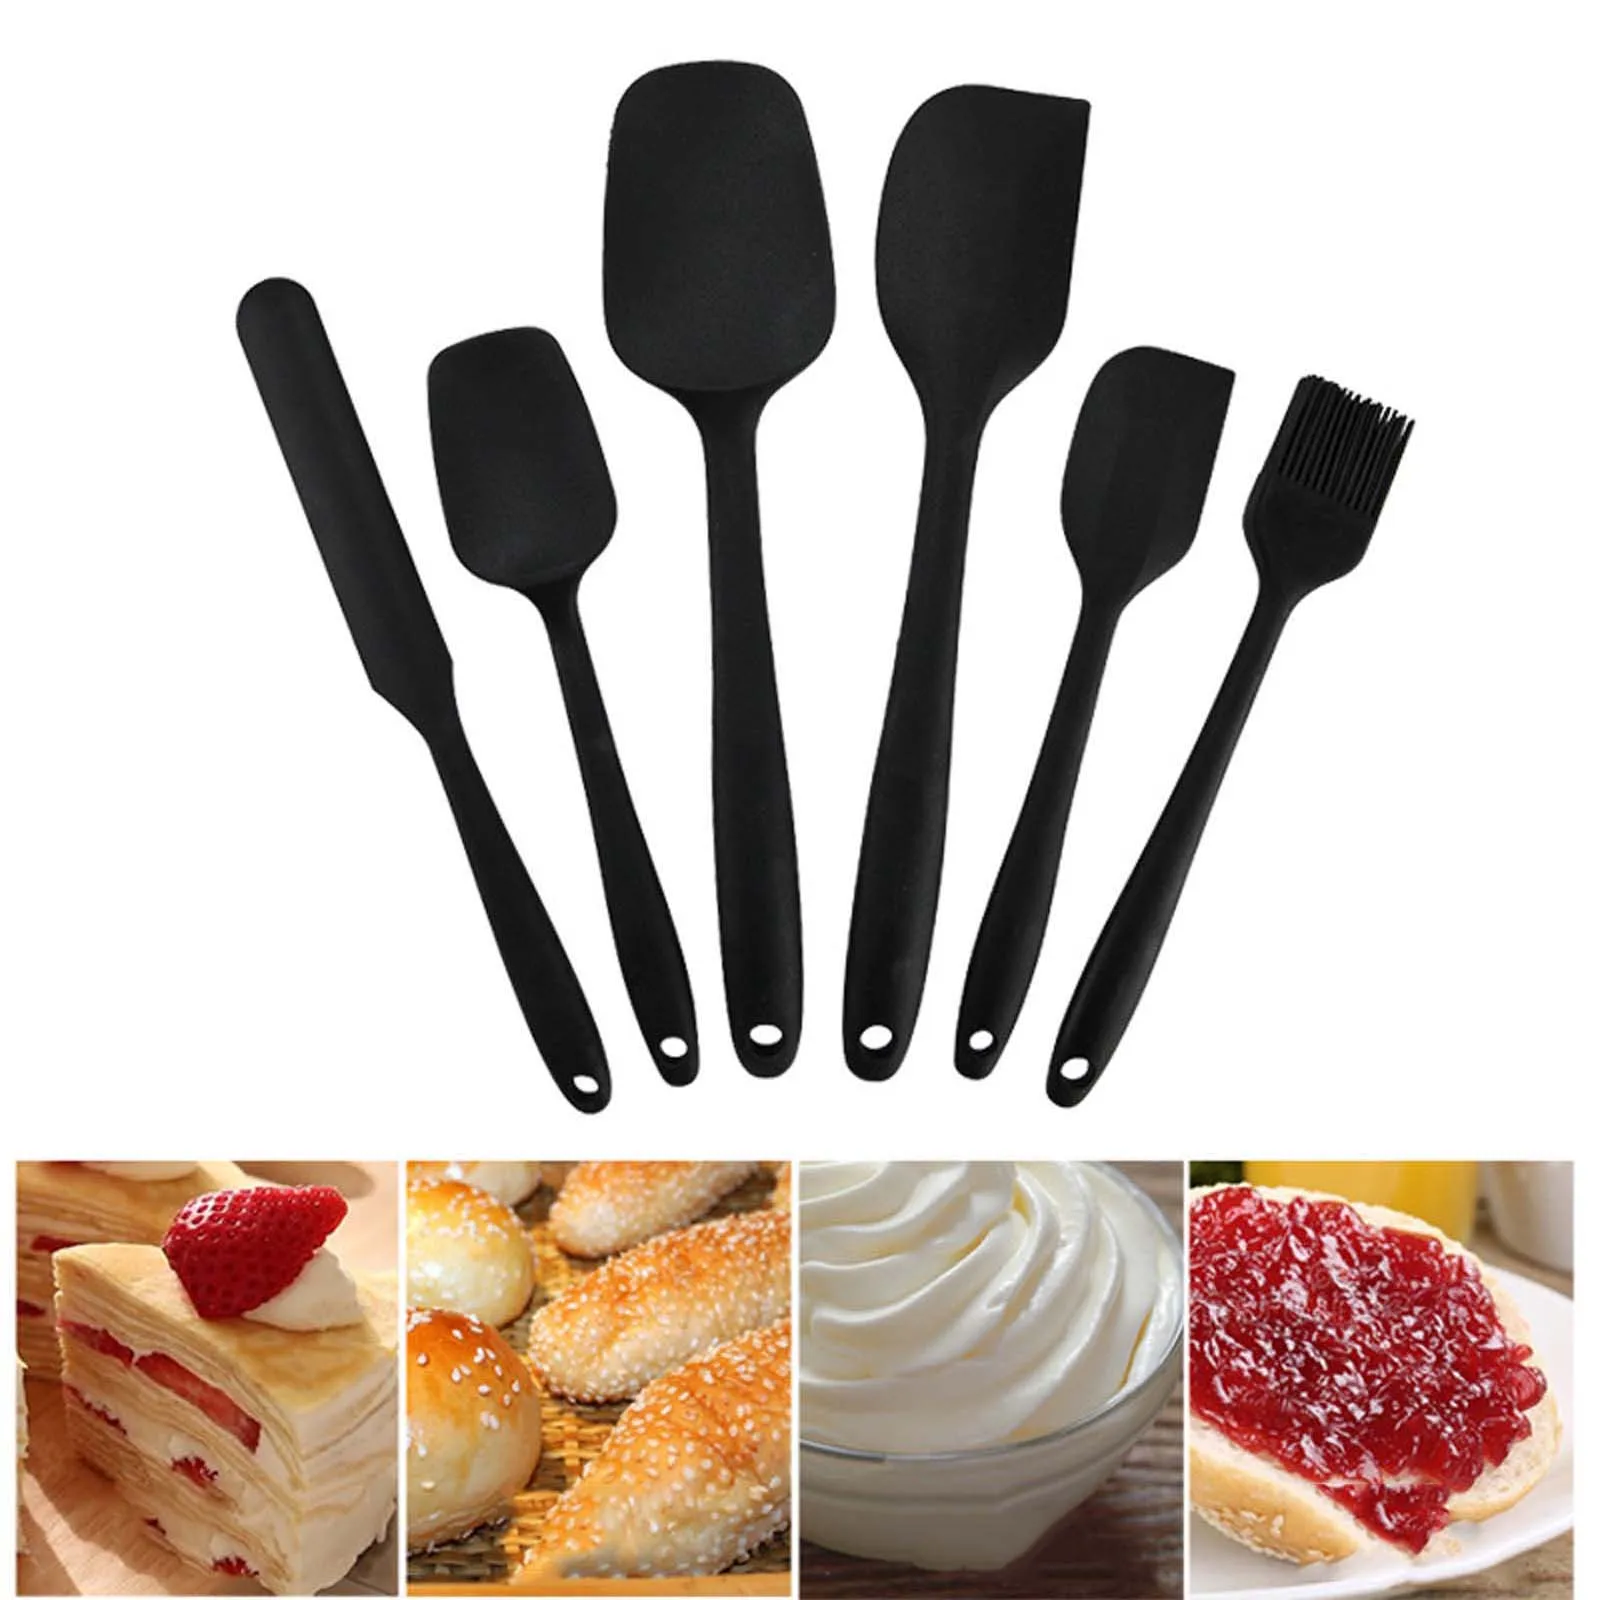 

6PCS Food Grade Silicone Non-Stick Butter Cooking Spatula Set Cookie Pastry Scraper Brush Cake Baking Mixing Tool Kitchen Tools